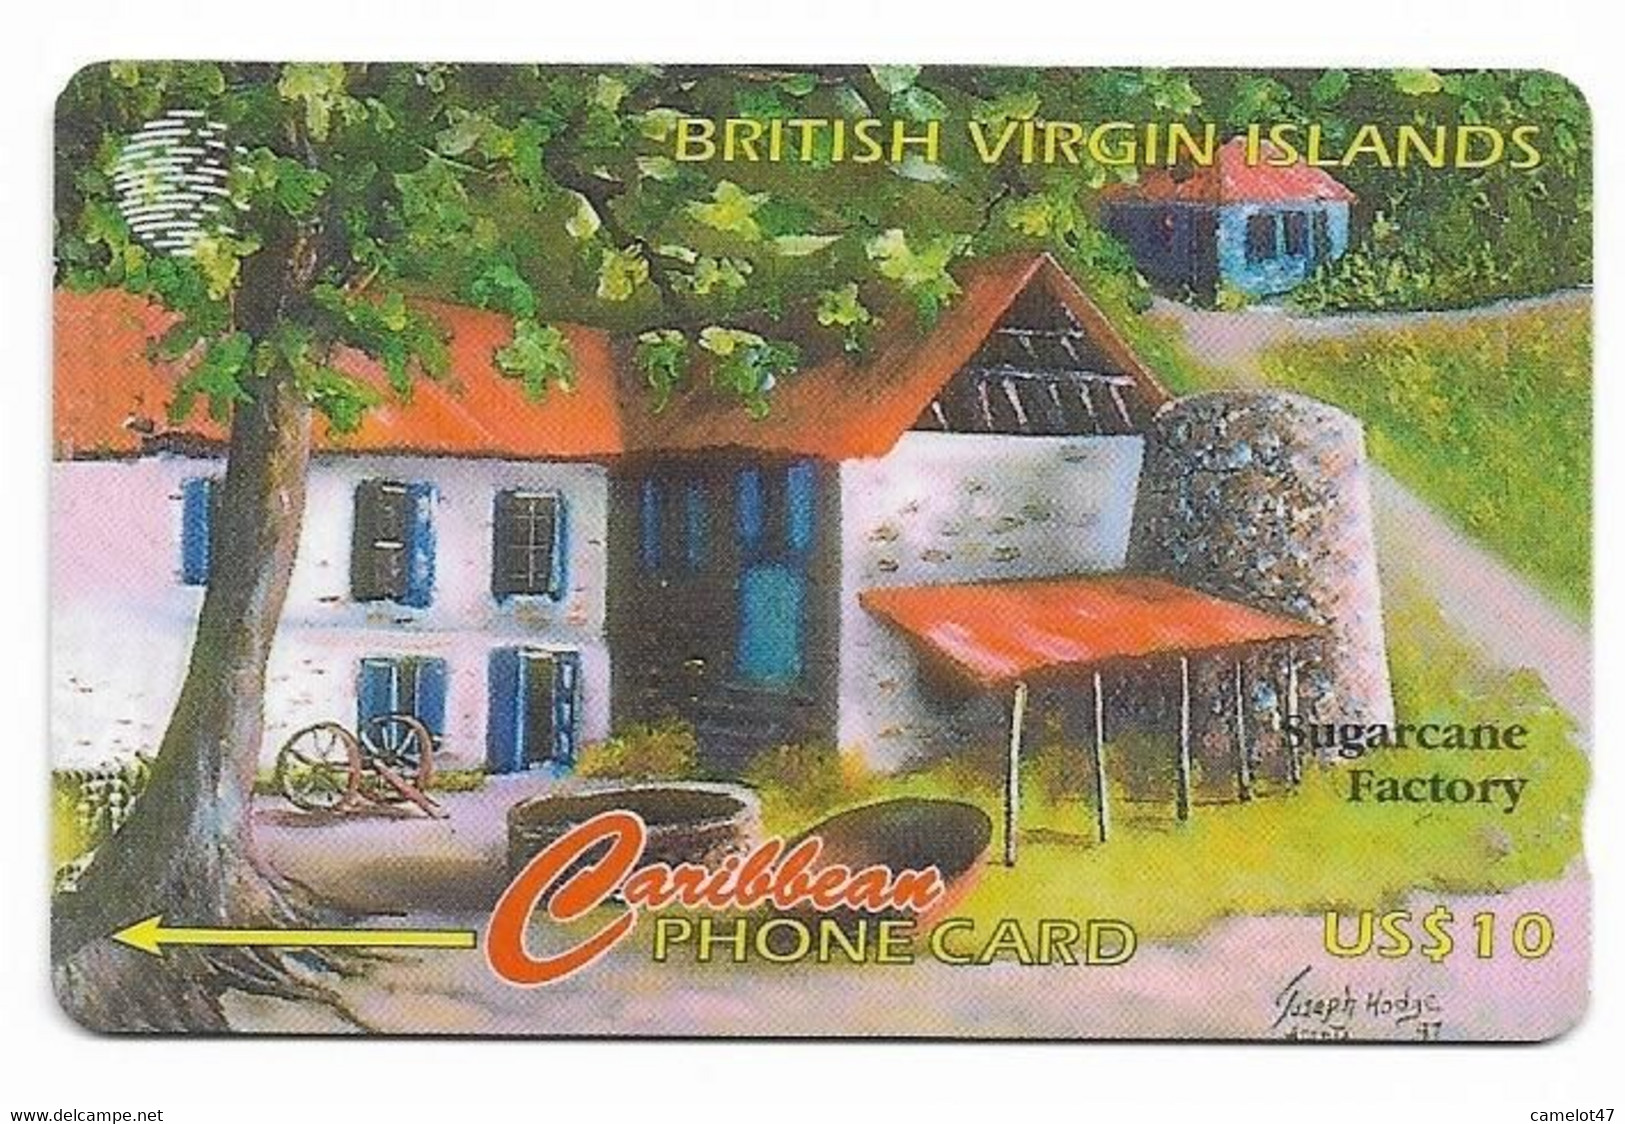 British Virgin Islands, Caribbean, Used Phonecard, No Value, Collectors Item, # Bvi-5  Shows Wear - Vierges (îles)